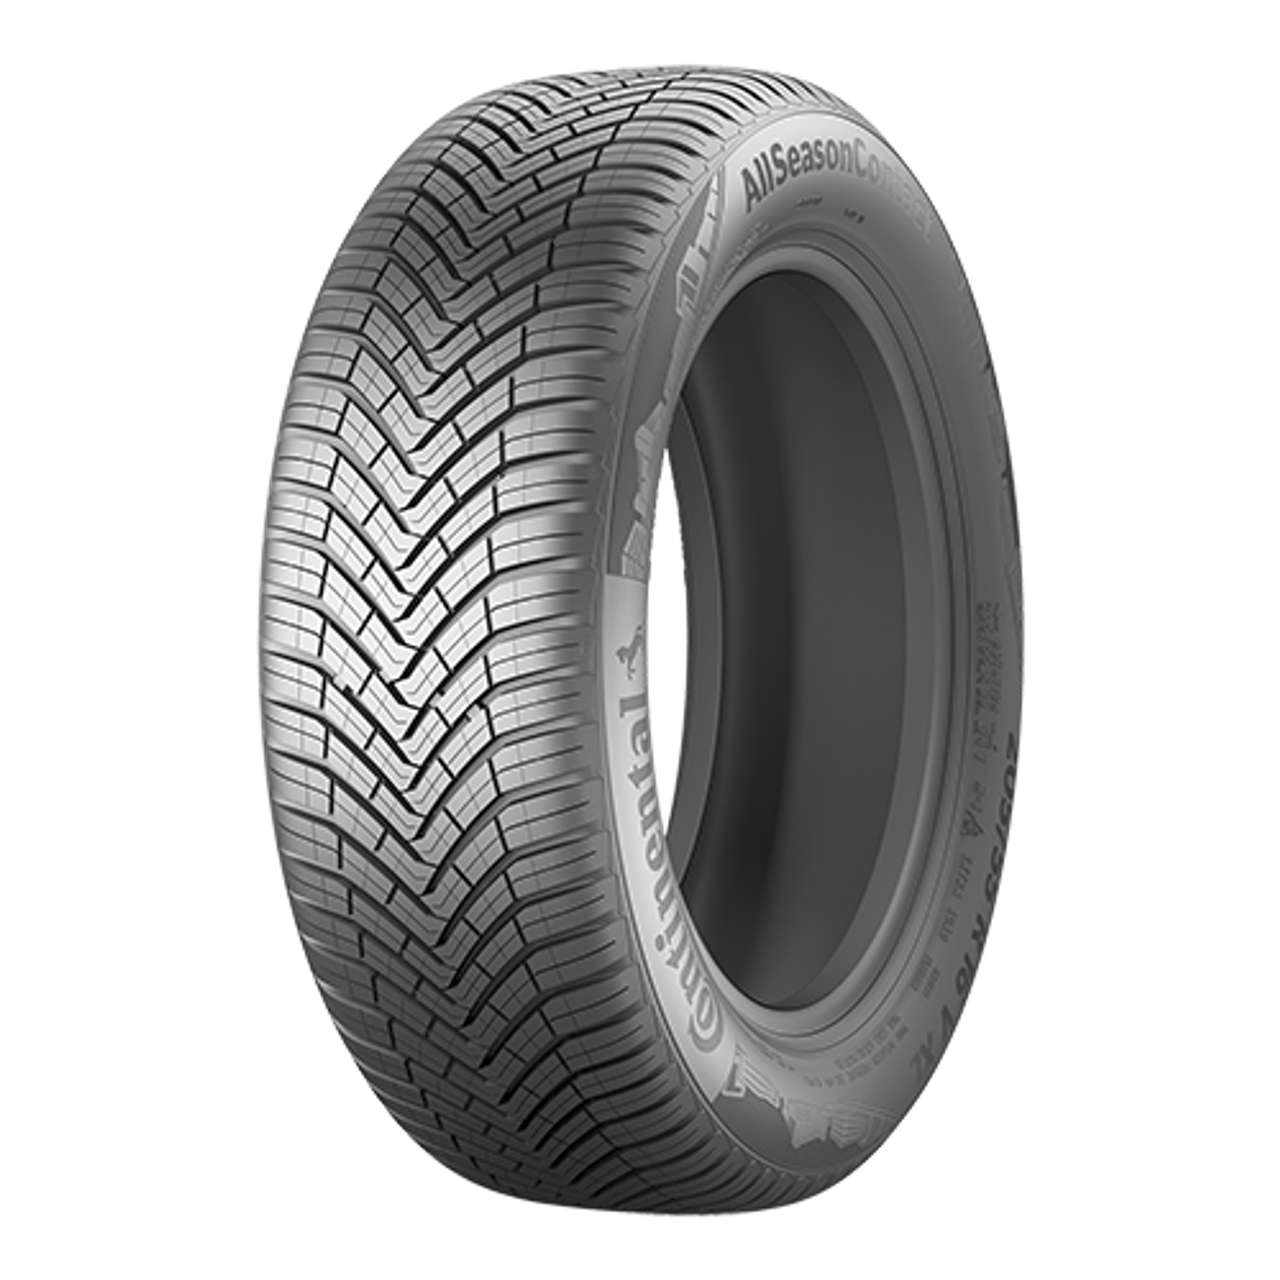 CONTINENTAL ALLSEASONCONTACT (EVc) 165/65R15 81T BSW